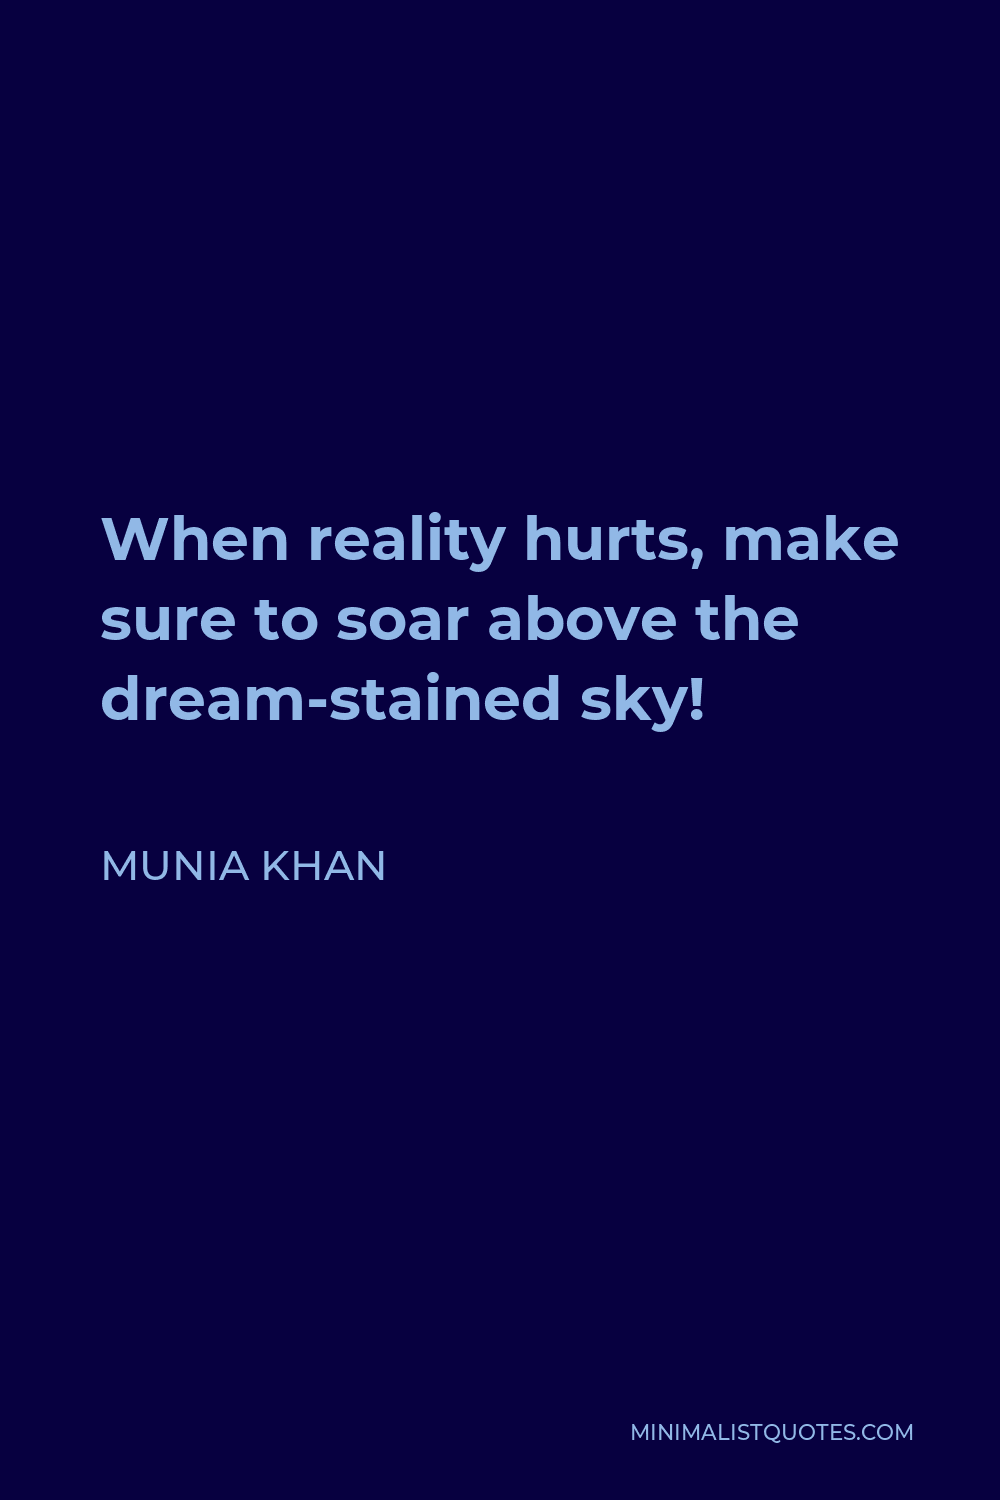 Munia Khan Quote - When reality hurts, make sure to soar above the dream-stained sky!